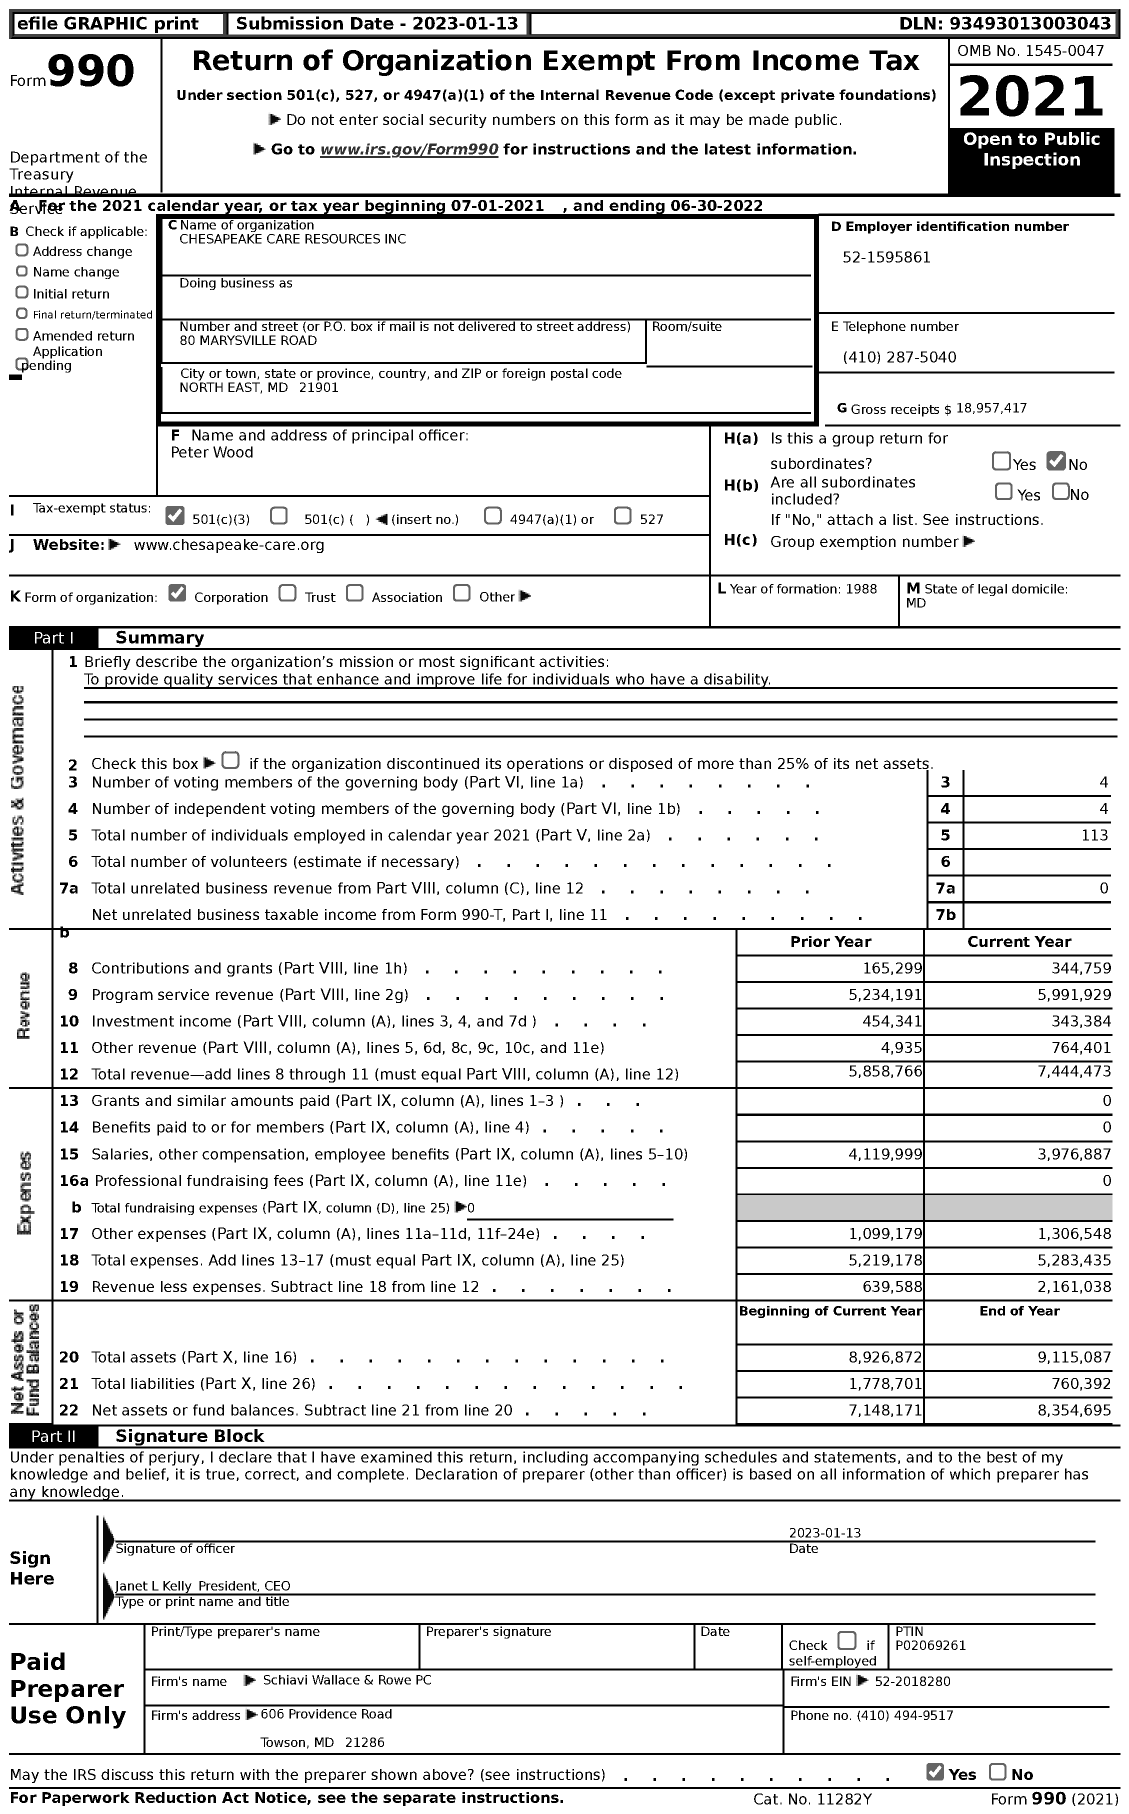 Image of first page of 2021 Form 990 for Chesapeake Care Resources (CCR)